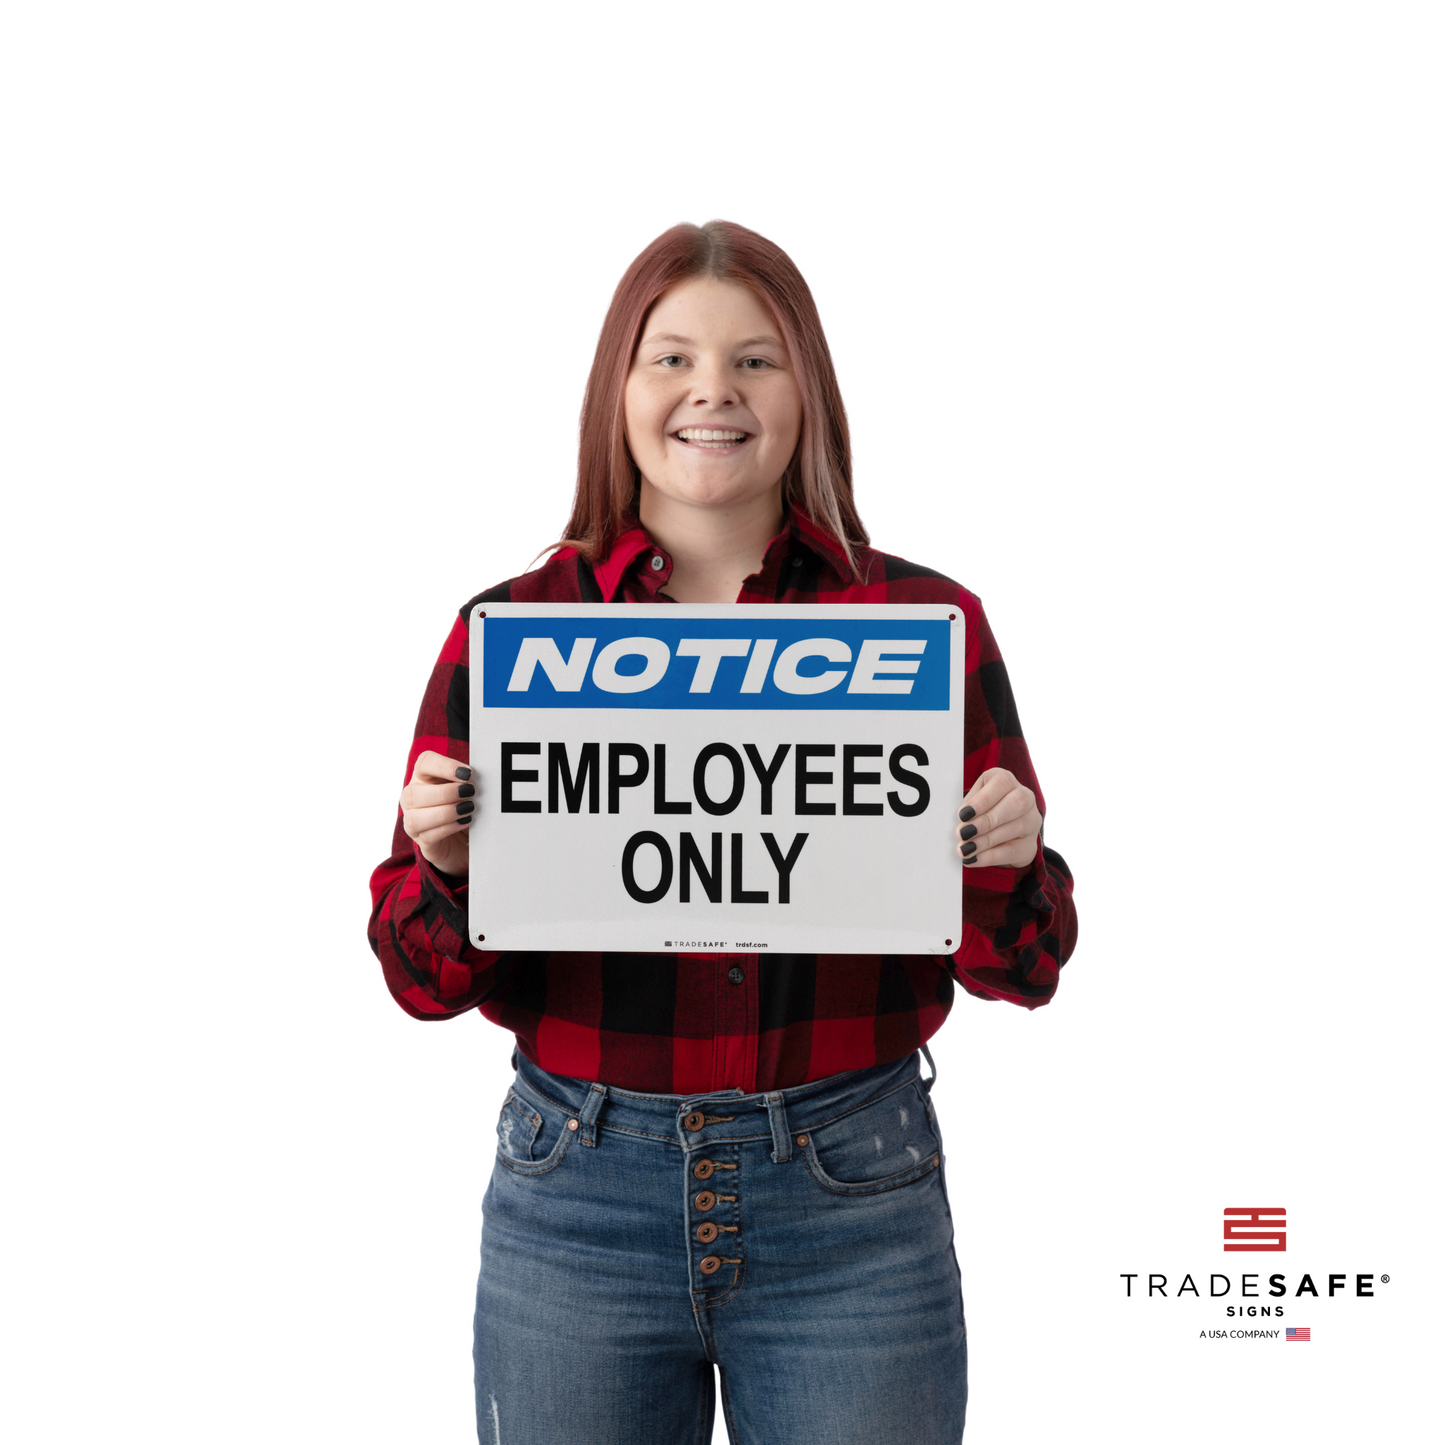 a person holding a notice sign with the text "employees only"